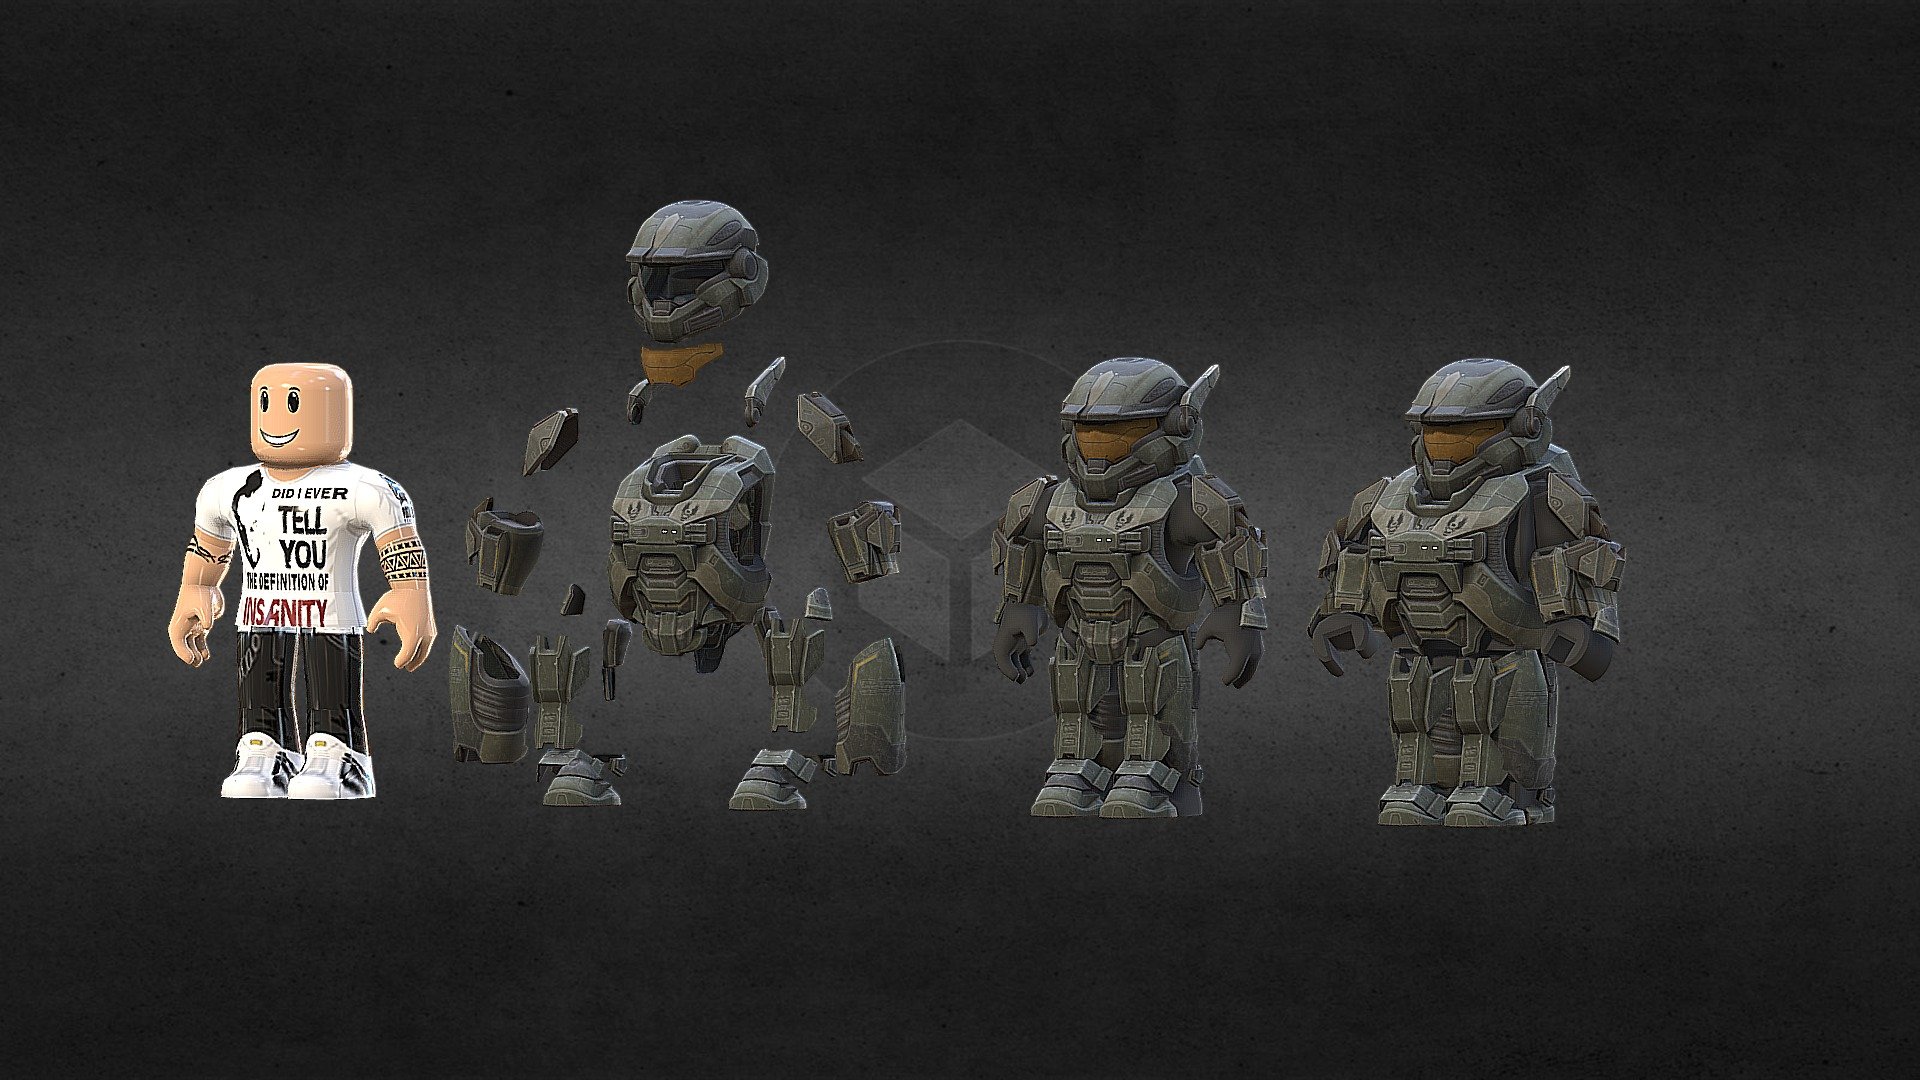 Roblox Halo set converted for Roblox model. Model used from Spartan Armour MKV
Free download working morph from Roblox

https://web.roblox.com/library/6448033464/piggy-pony-morph - Roblox Halo set v2 - Download Free 3D model by nermin 3d model